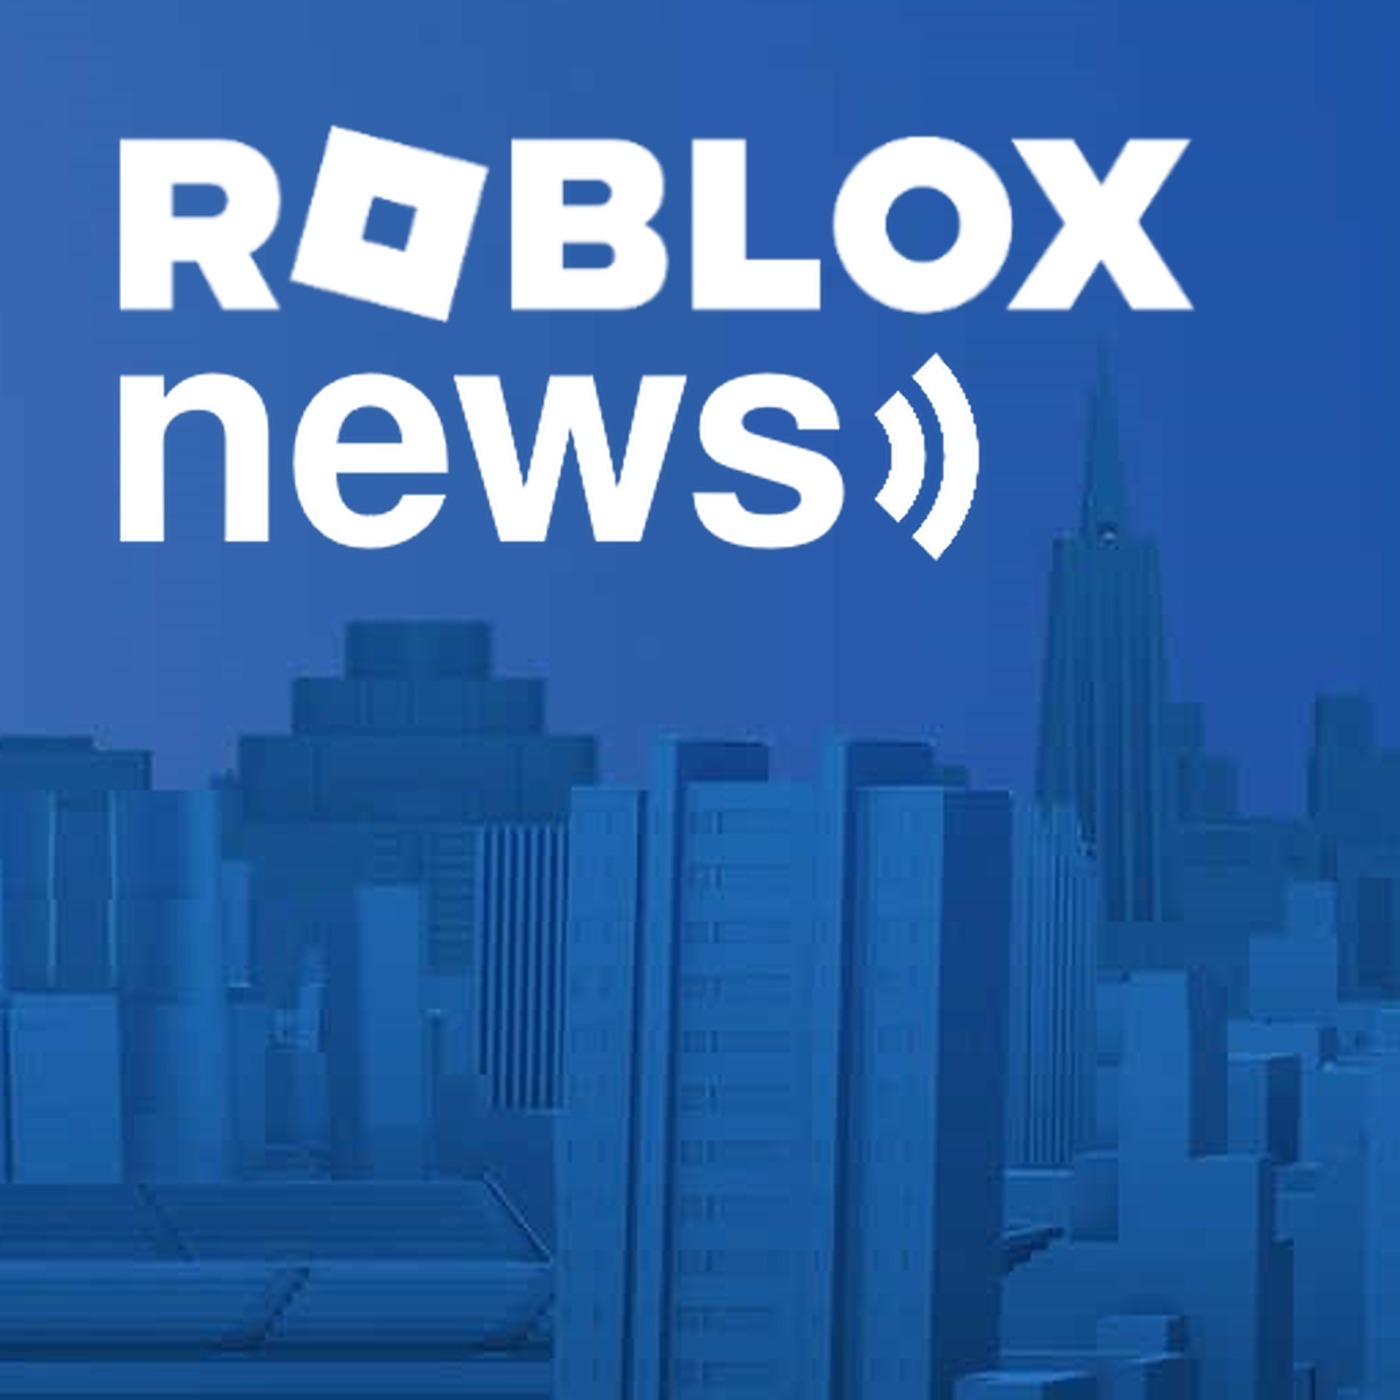 GREAT NEWS ABOUT ROBLOX! 